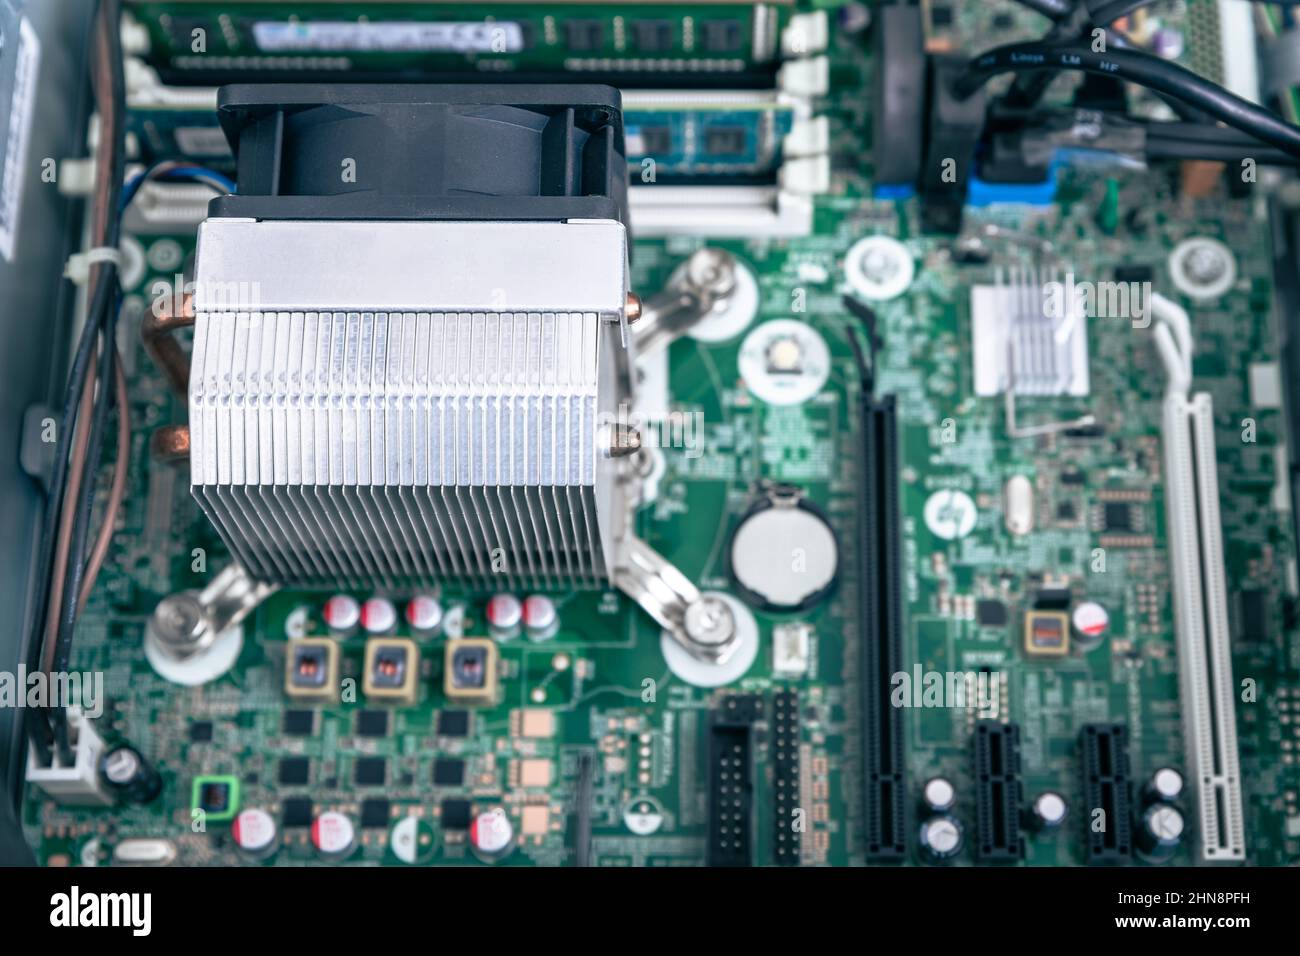 Woodville, Australia - October 15, 2021: Close-up top view of CPU cooler installed in business desktop PC motherboard Stock Photo